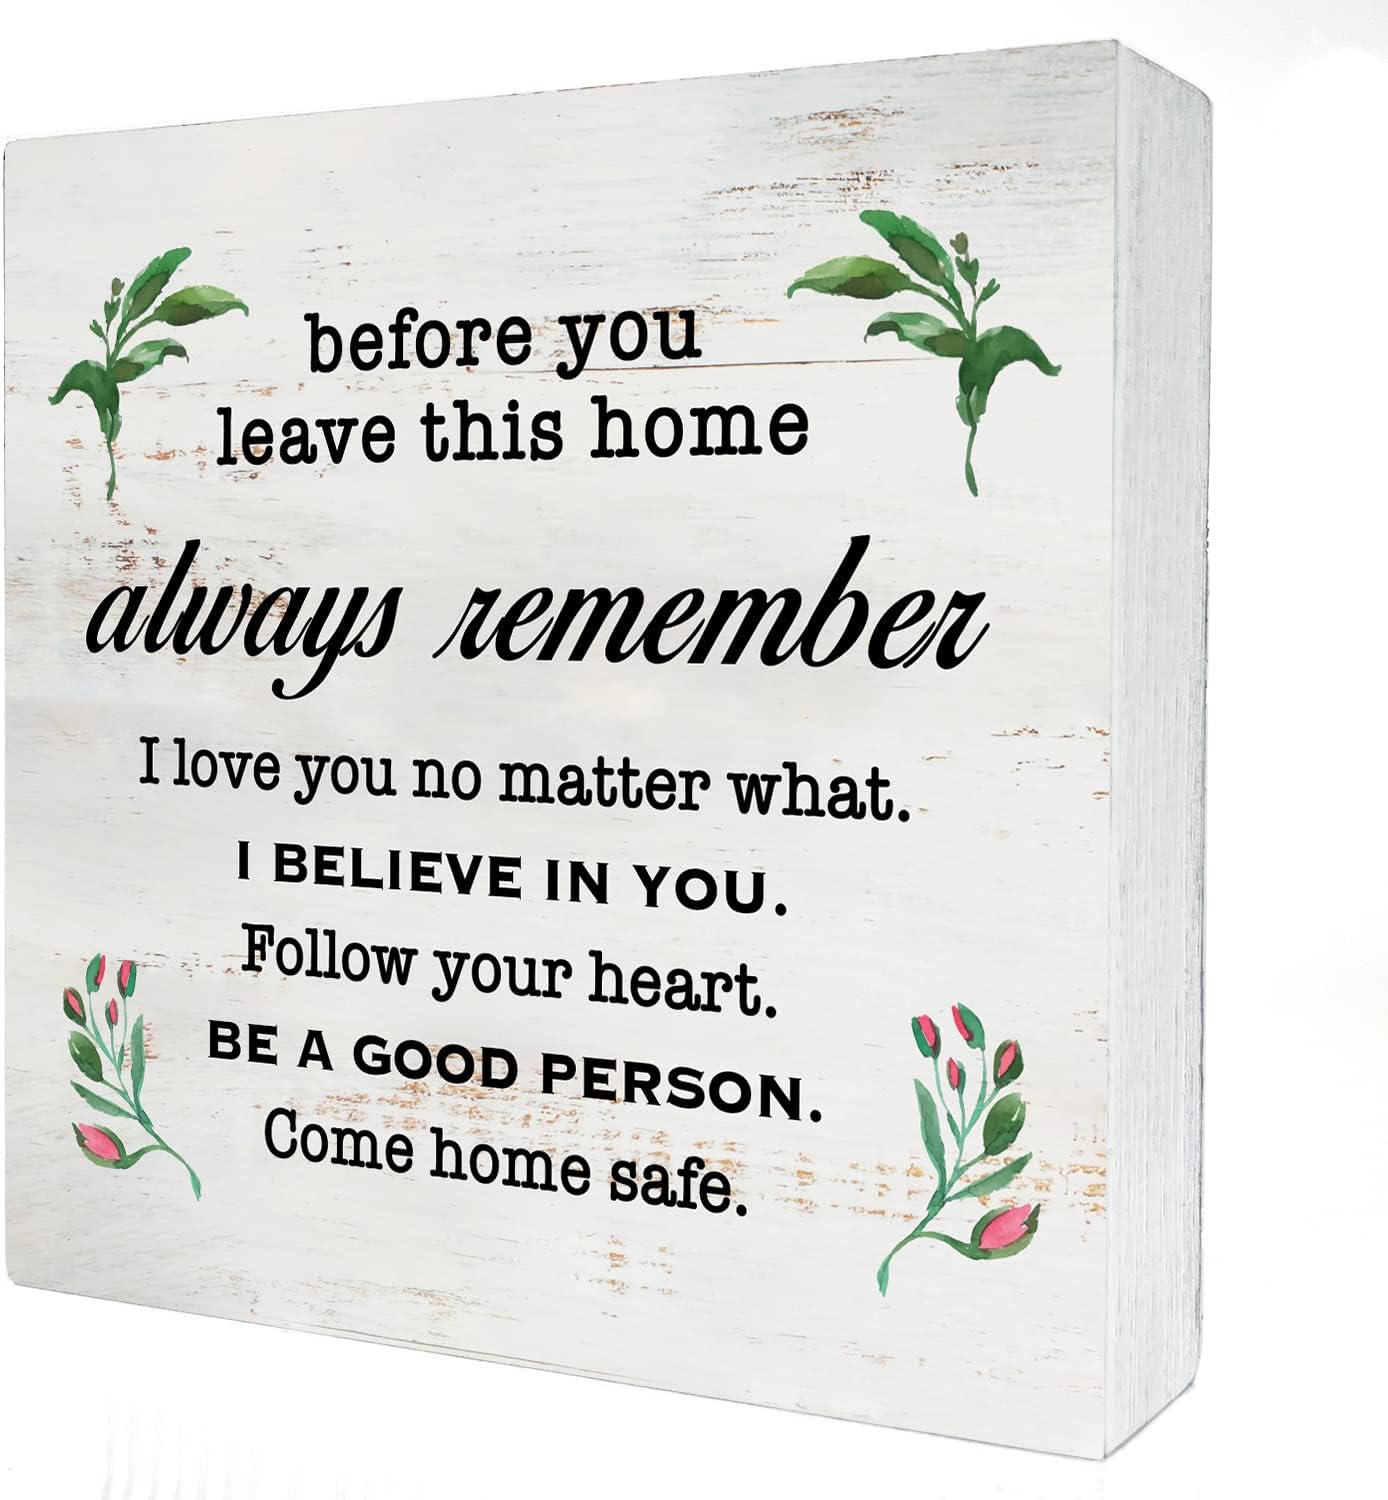 Before You Leave This Home Always Remember Wood Box Sign Decor Rustic ...